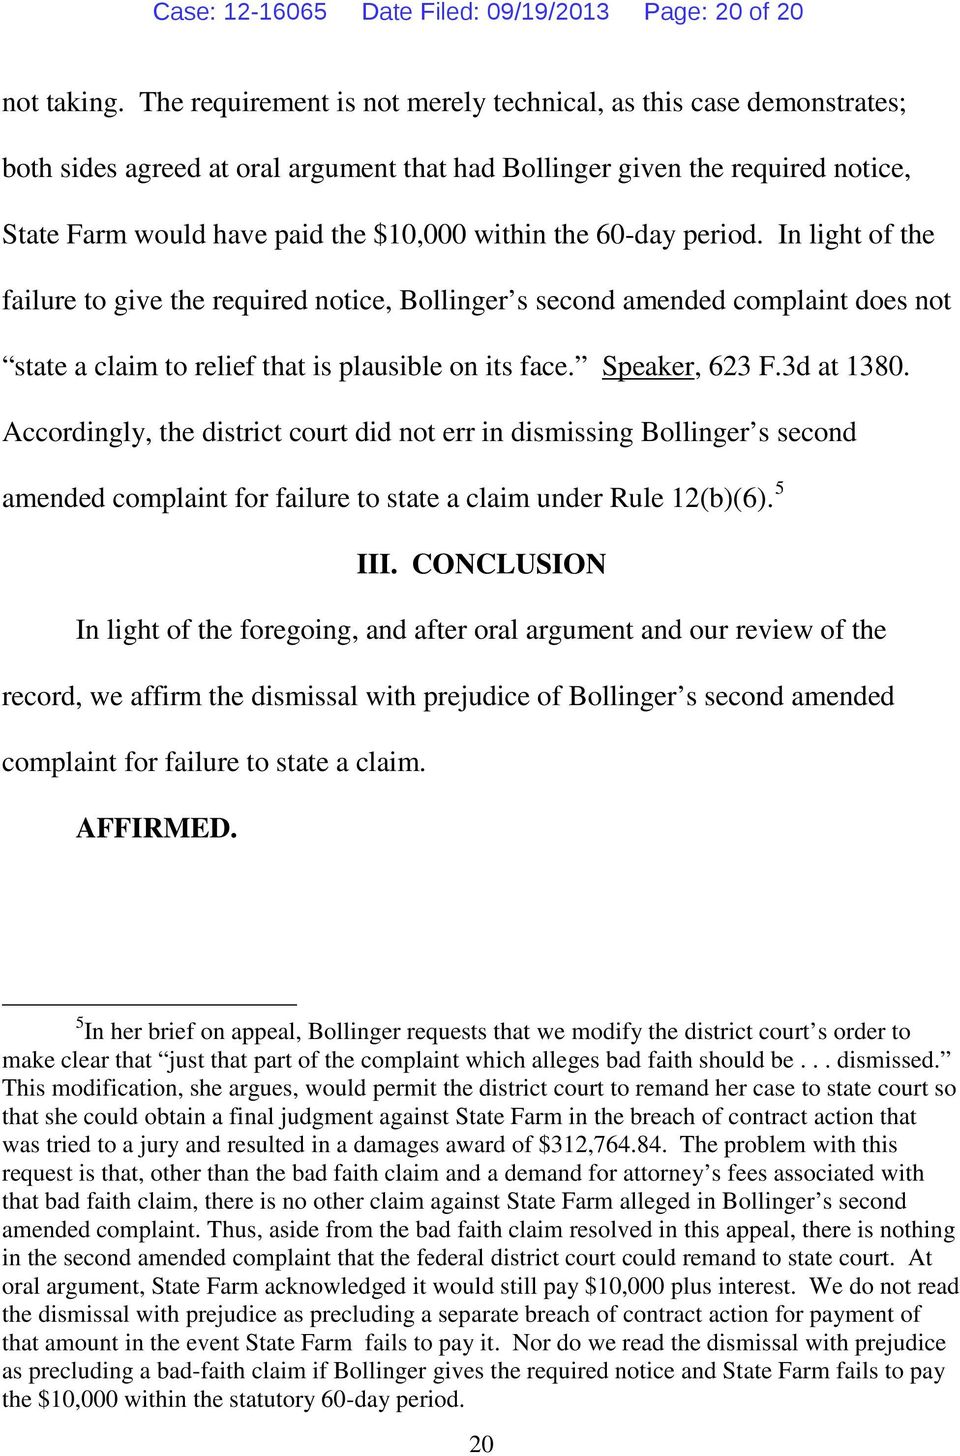 60-day period. In light of the failure to give the required notice, Bollinger s second amended complaint does not state a claim to relief that is plausible on its face. Speaker, 623 F.3d at 1380.